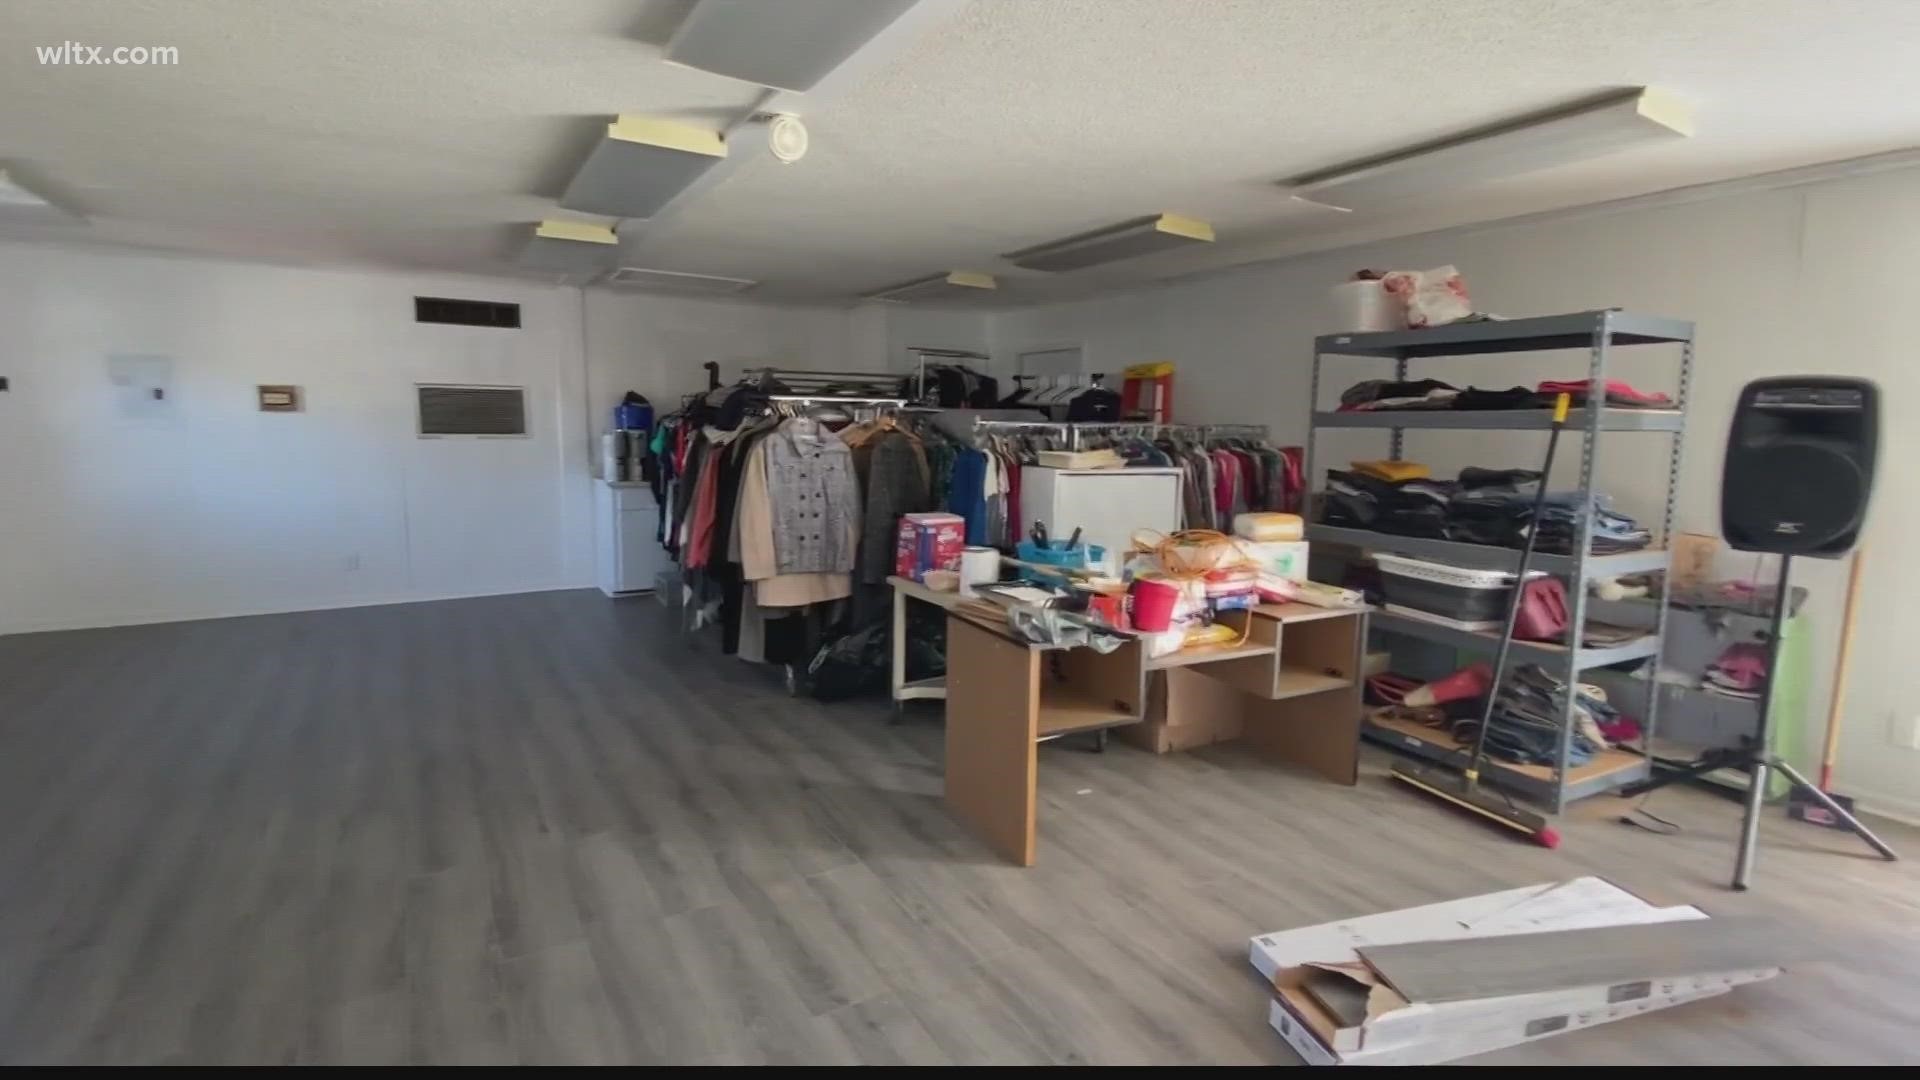 The Kershaw county sheriff's department saw a need and wanted to help so they created a place were domestic violence victims would have items to start over.